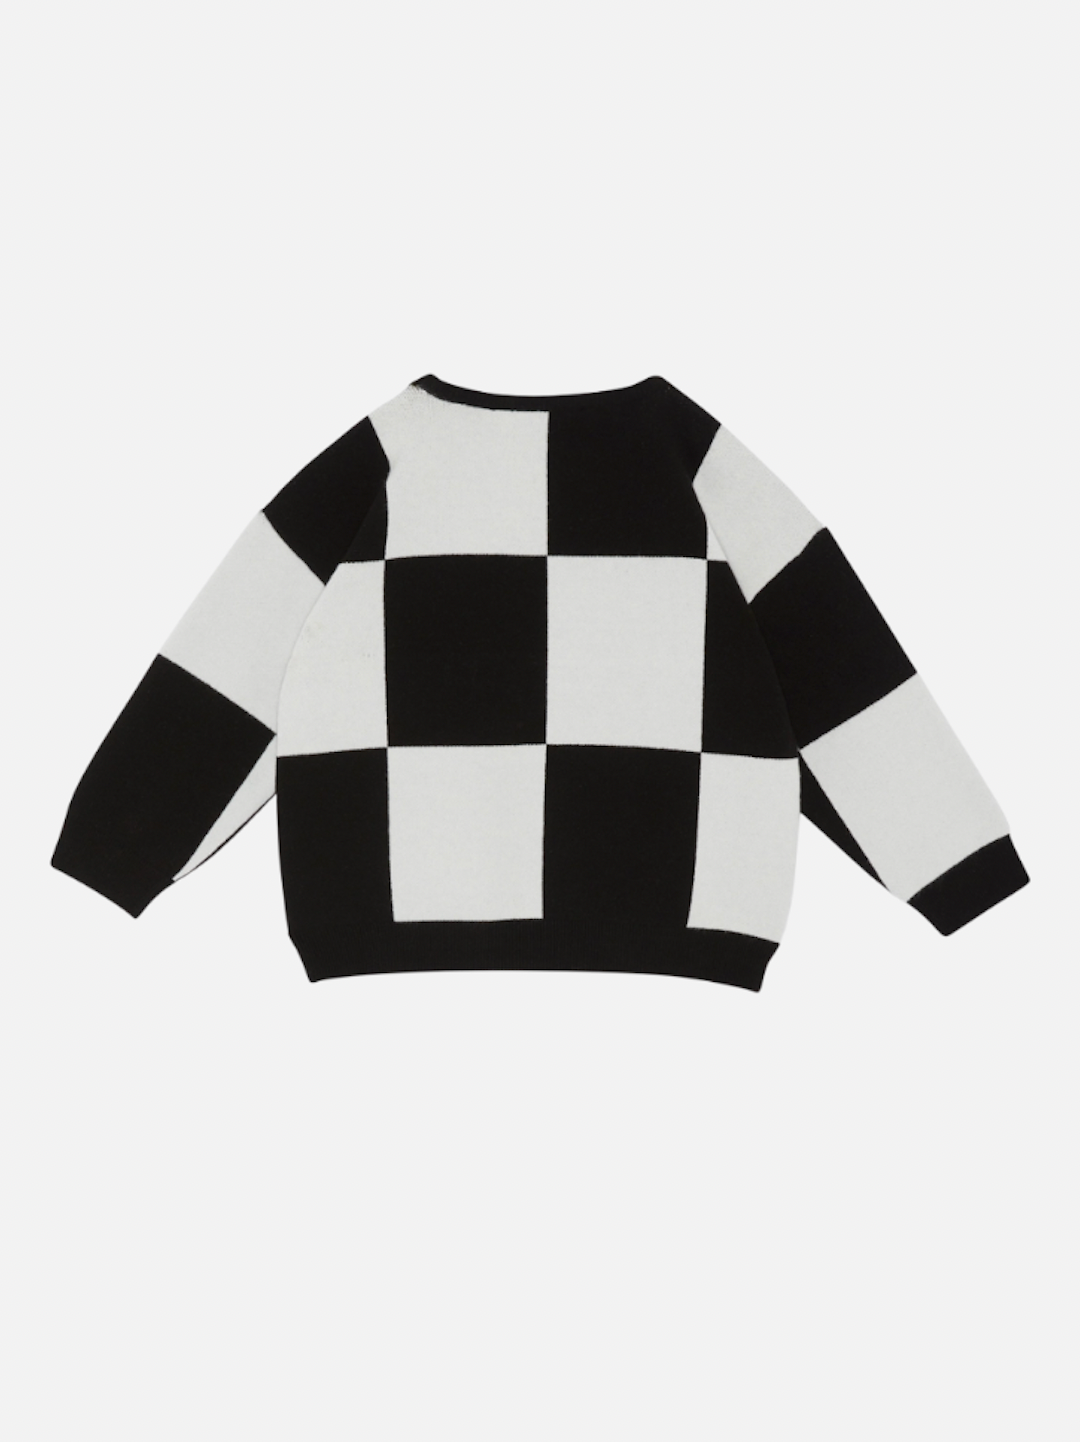 A kids' sweatshirt in a bold black and white checkerboard, back view